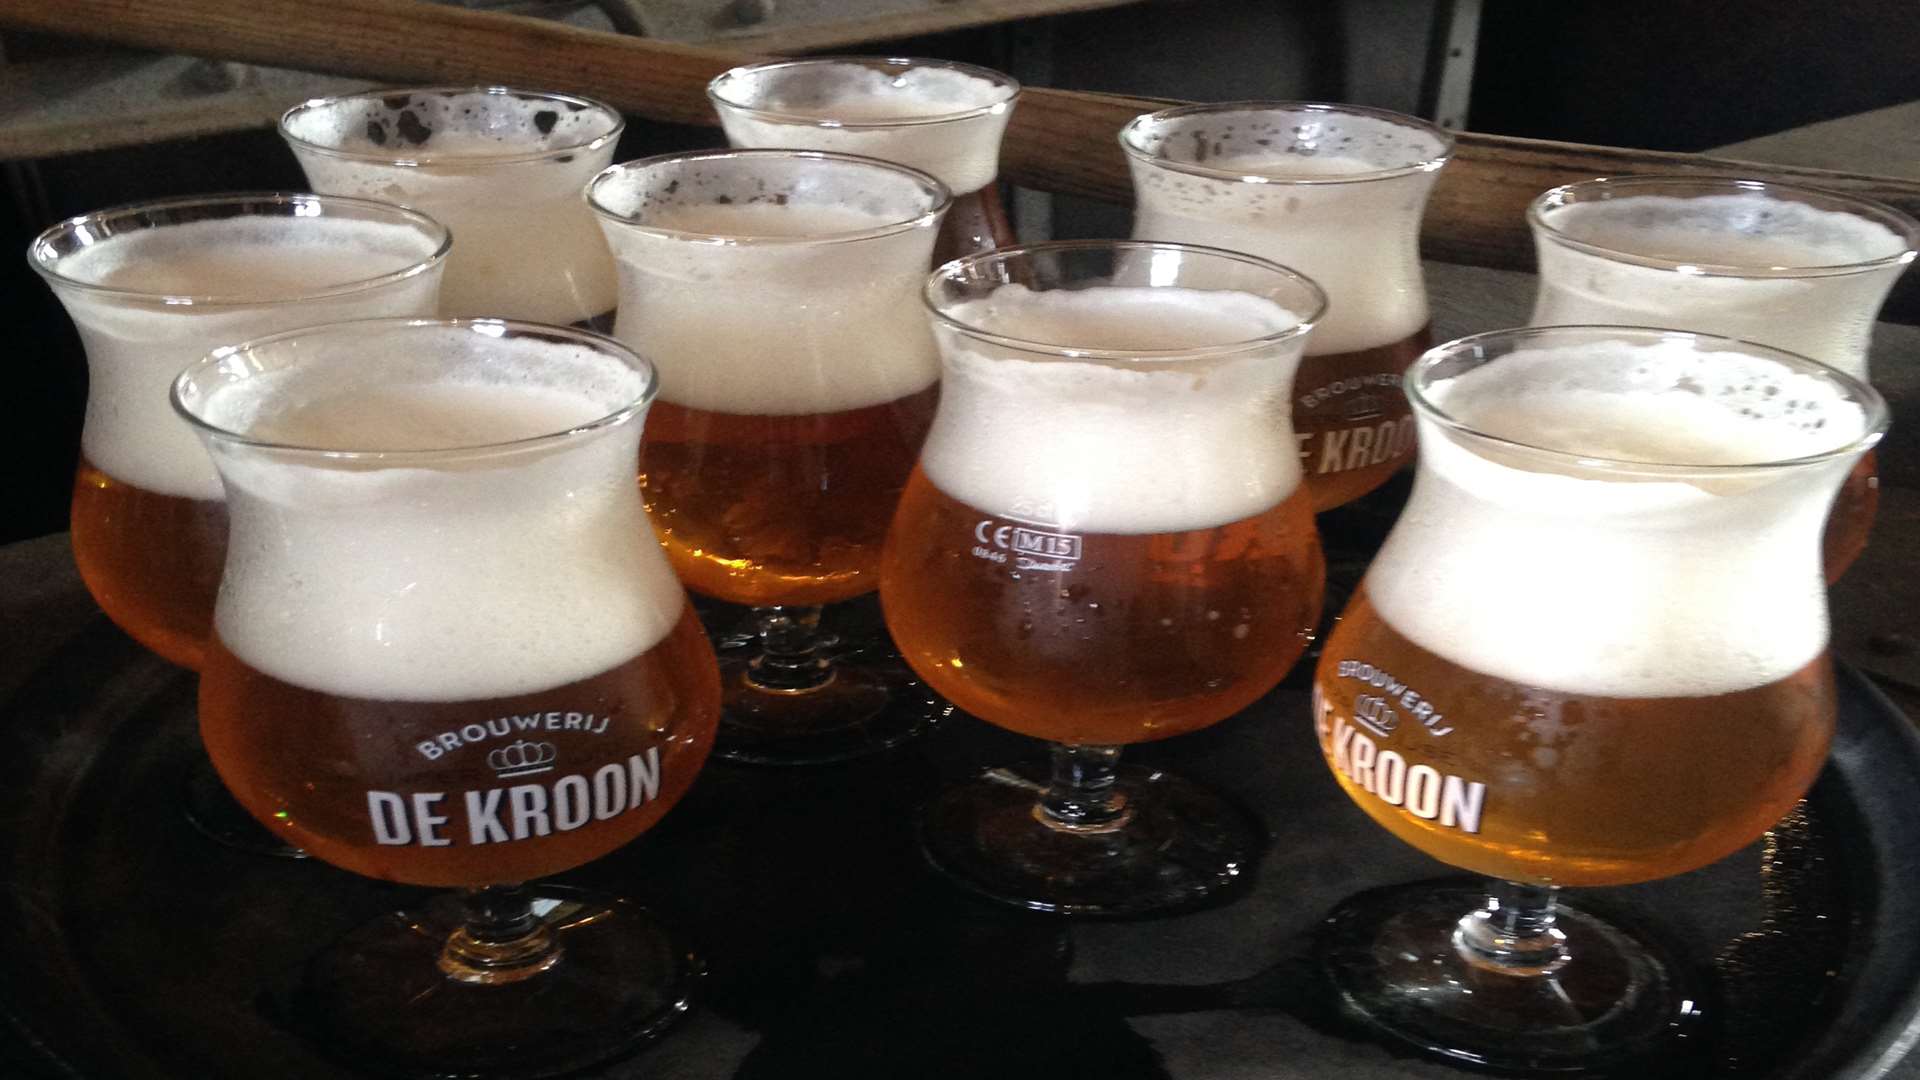 Fancy a pint? 'Professor of Beer' Freddy Delvaux, serves his favourite beer made at the De Kroon Brewery